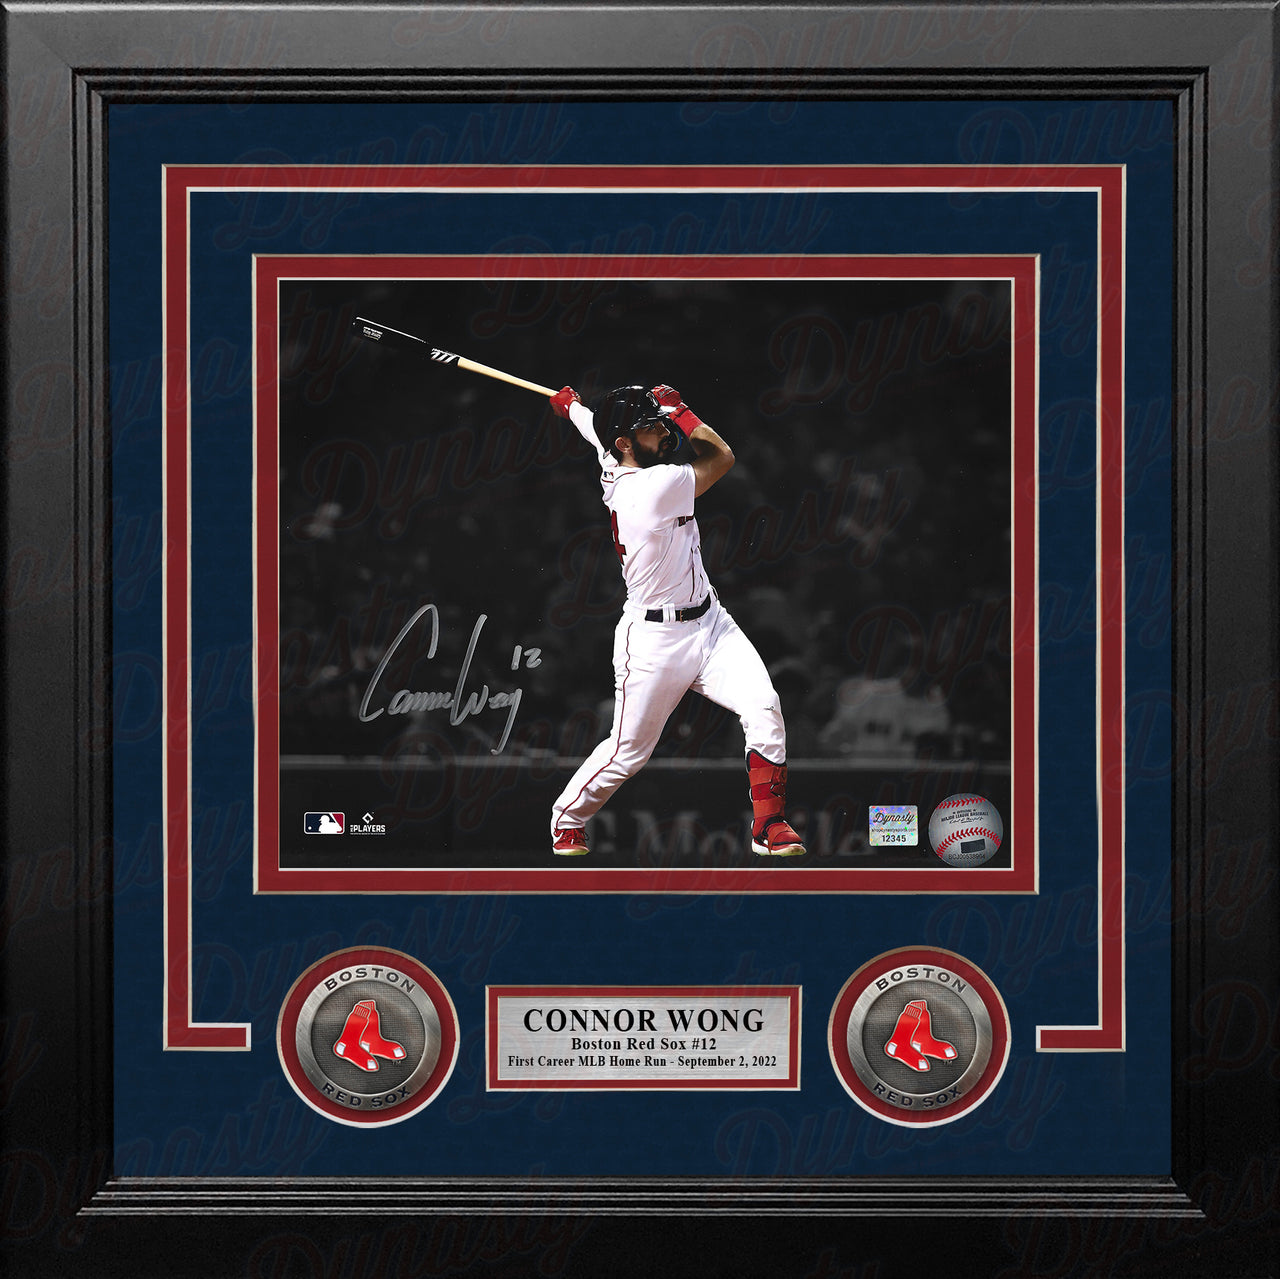 Connor Wong 1st Home Run Boston Red Sox Autographed 8" x 10" Framed Spotlight Baseball Photo